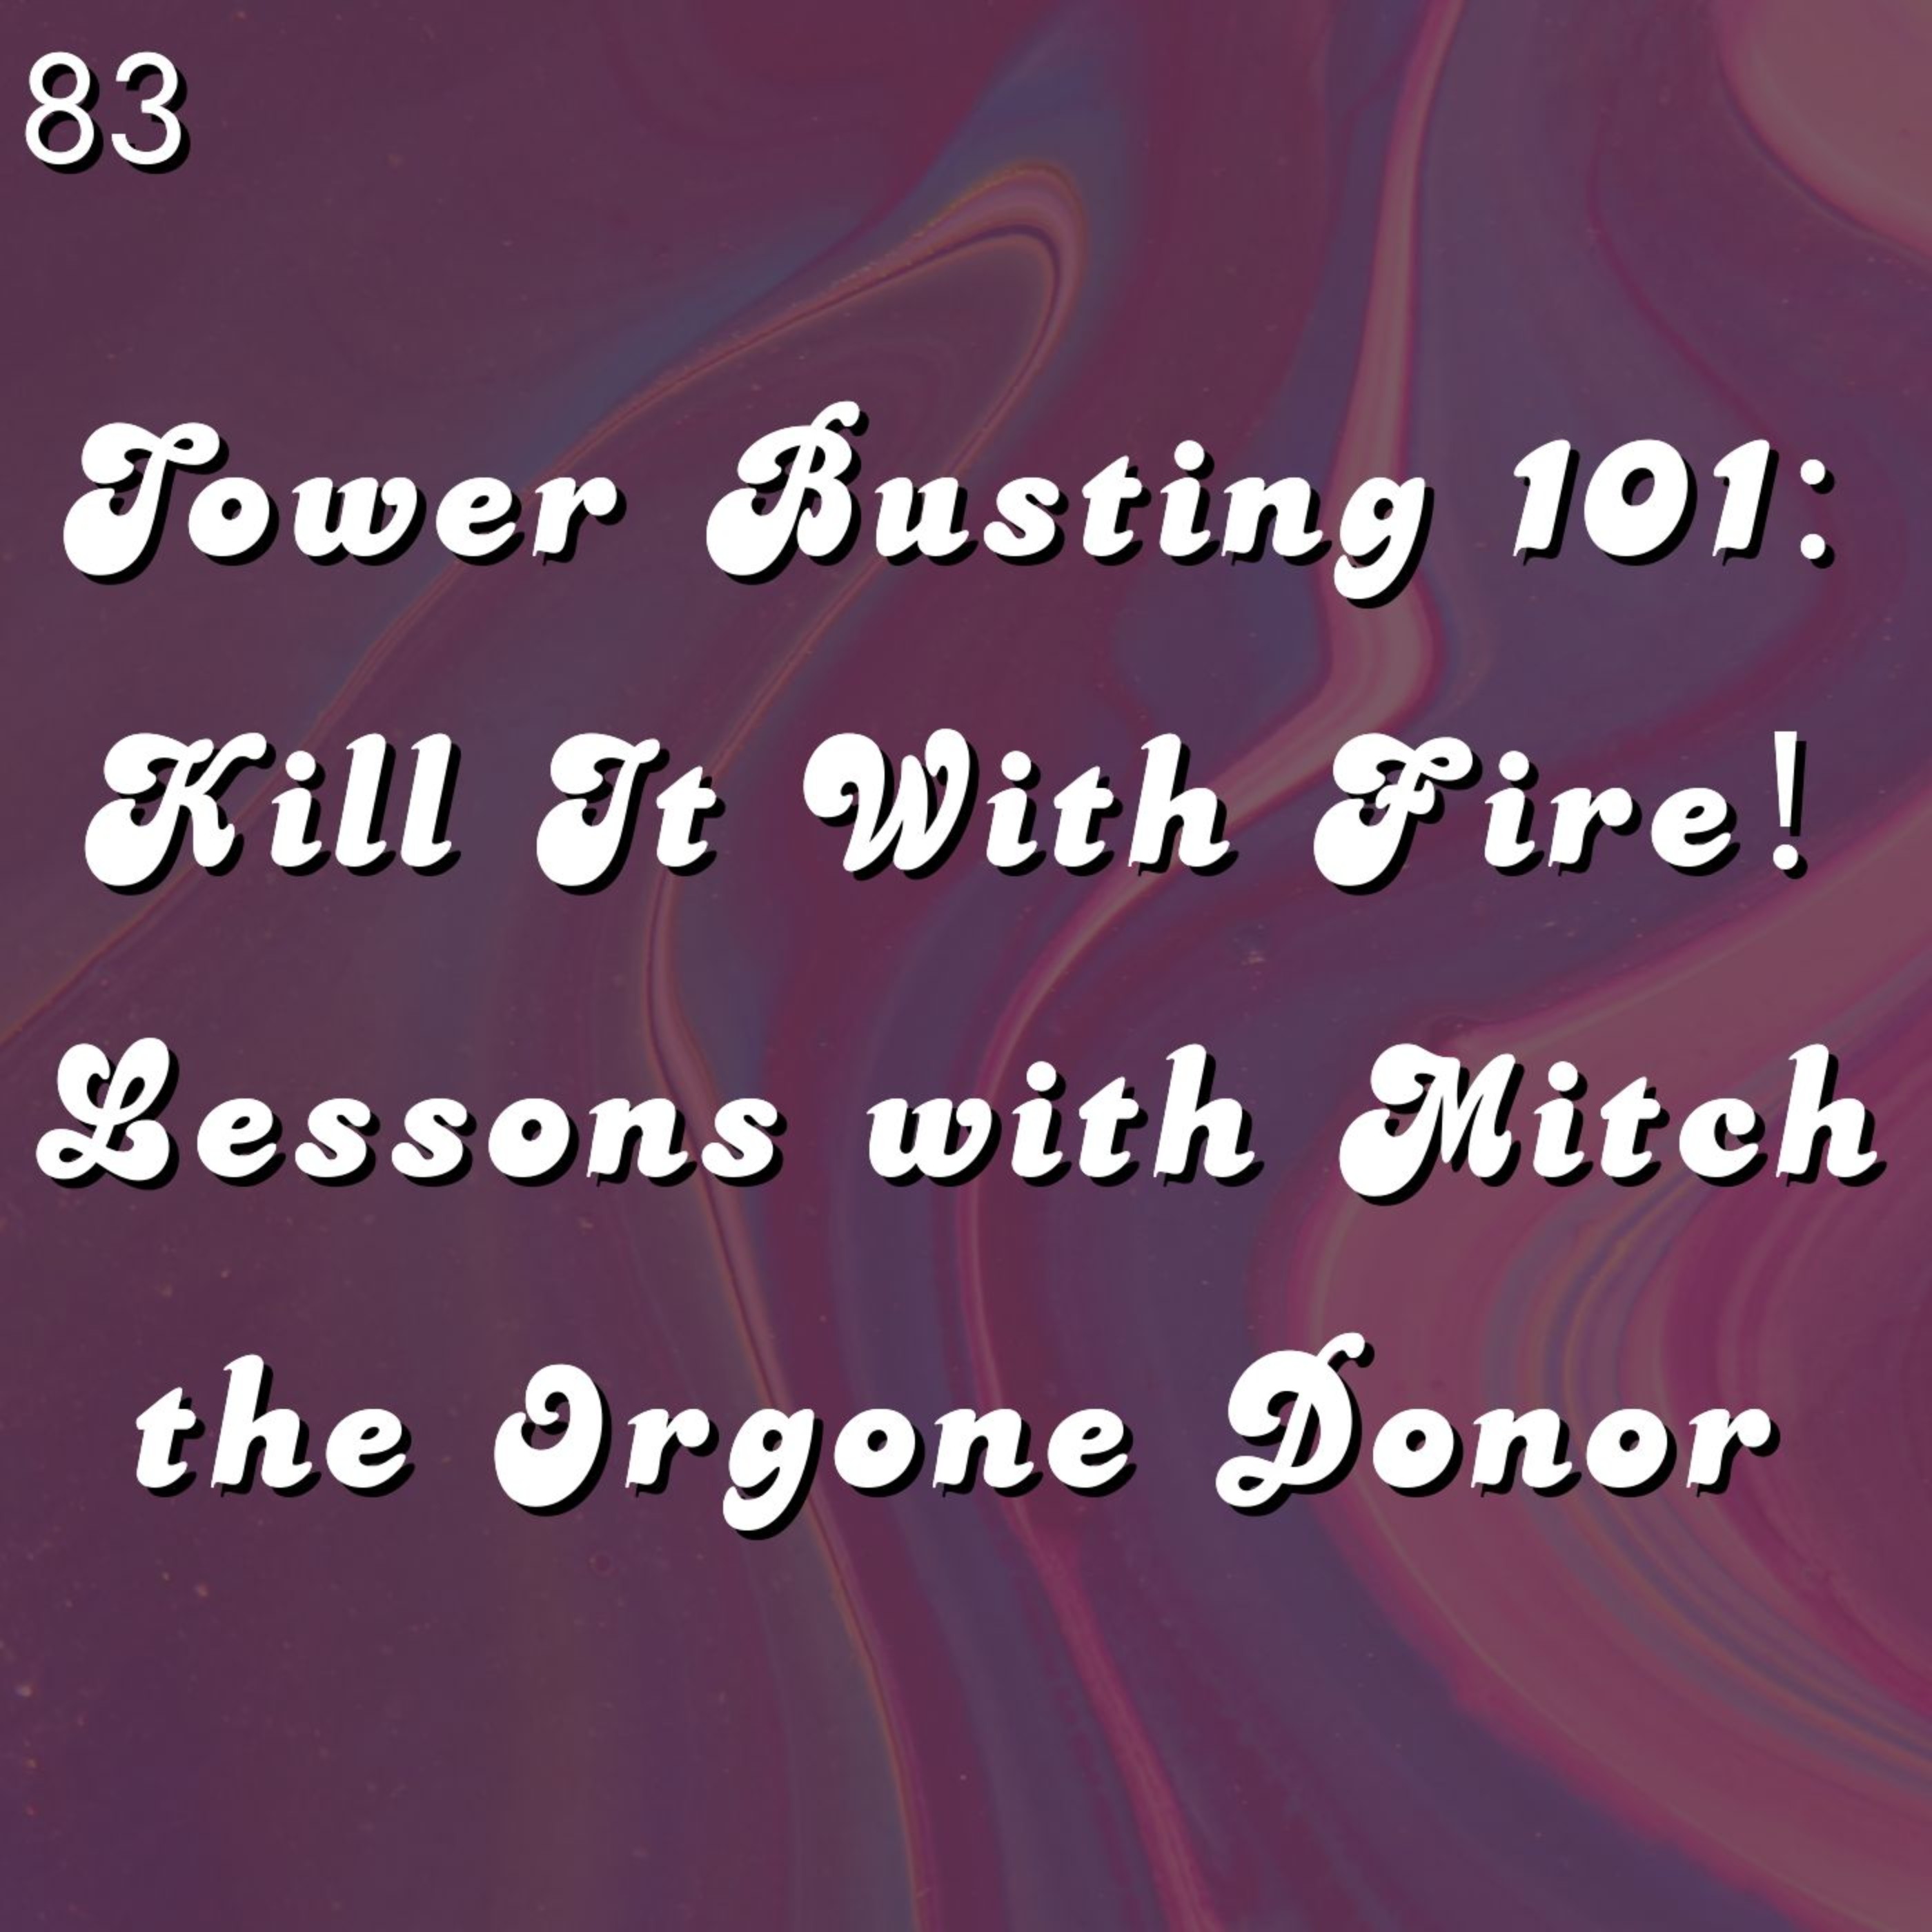 #83 - Tower Busting 101: Kill It With Fire! Lessons with Mitch the Orgone Donor